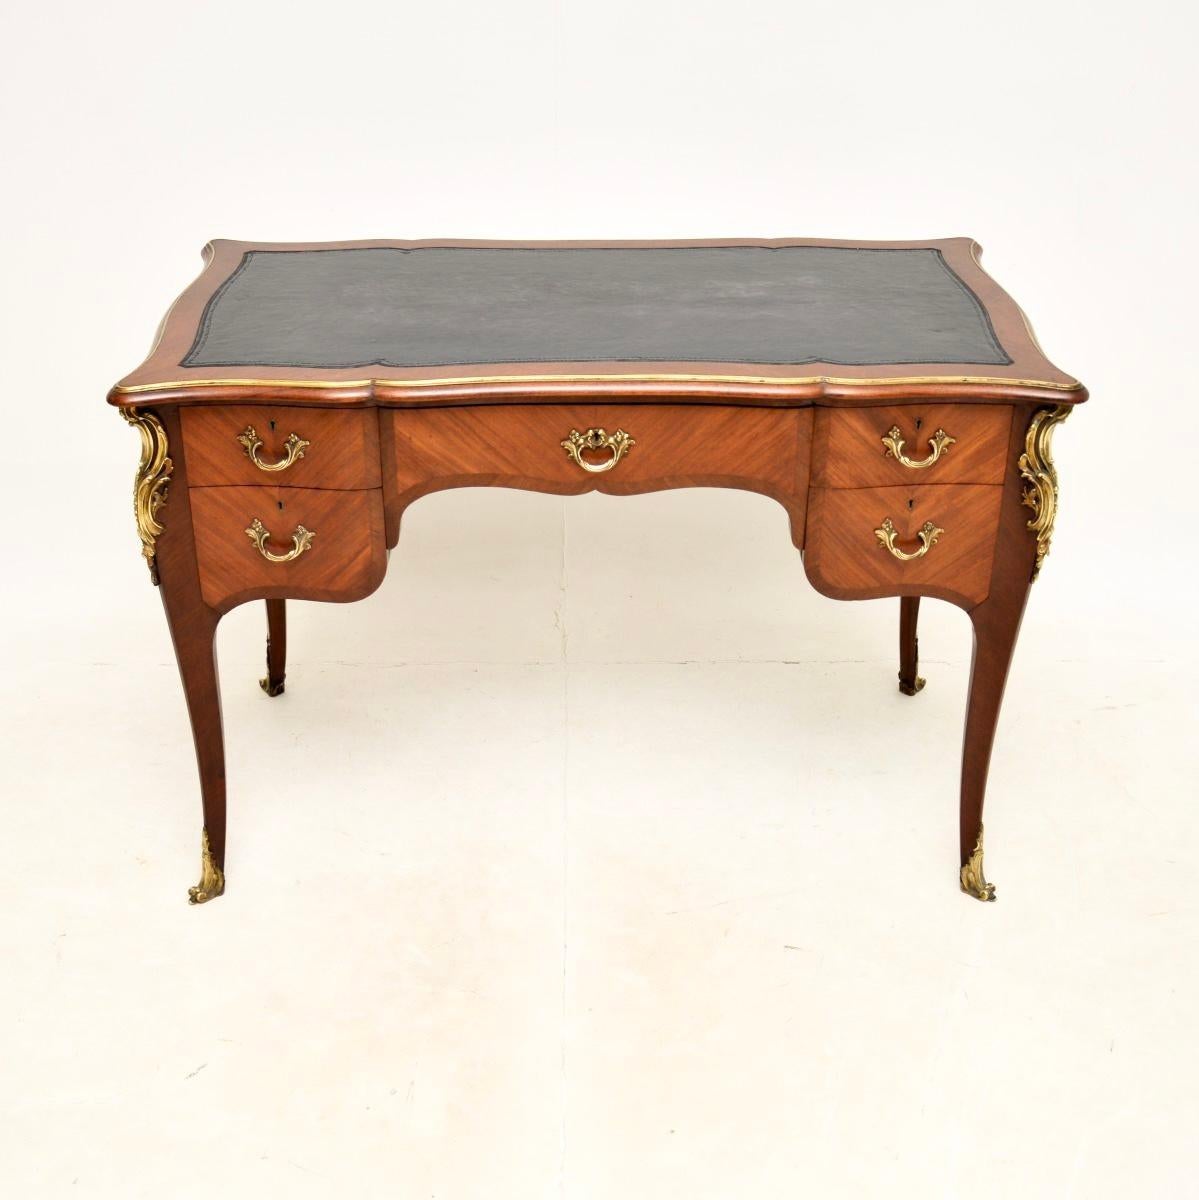 A stunning antique French walnut bureau plat desk, dating from around the 1900-1910 period.

It is of outstanding quality, this has fantastic gilt metal ormolu mounts all over, including around the top edge. All edges are nicely cross banded, this